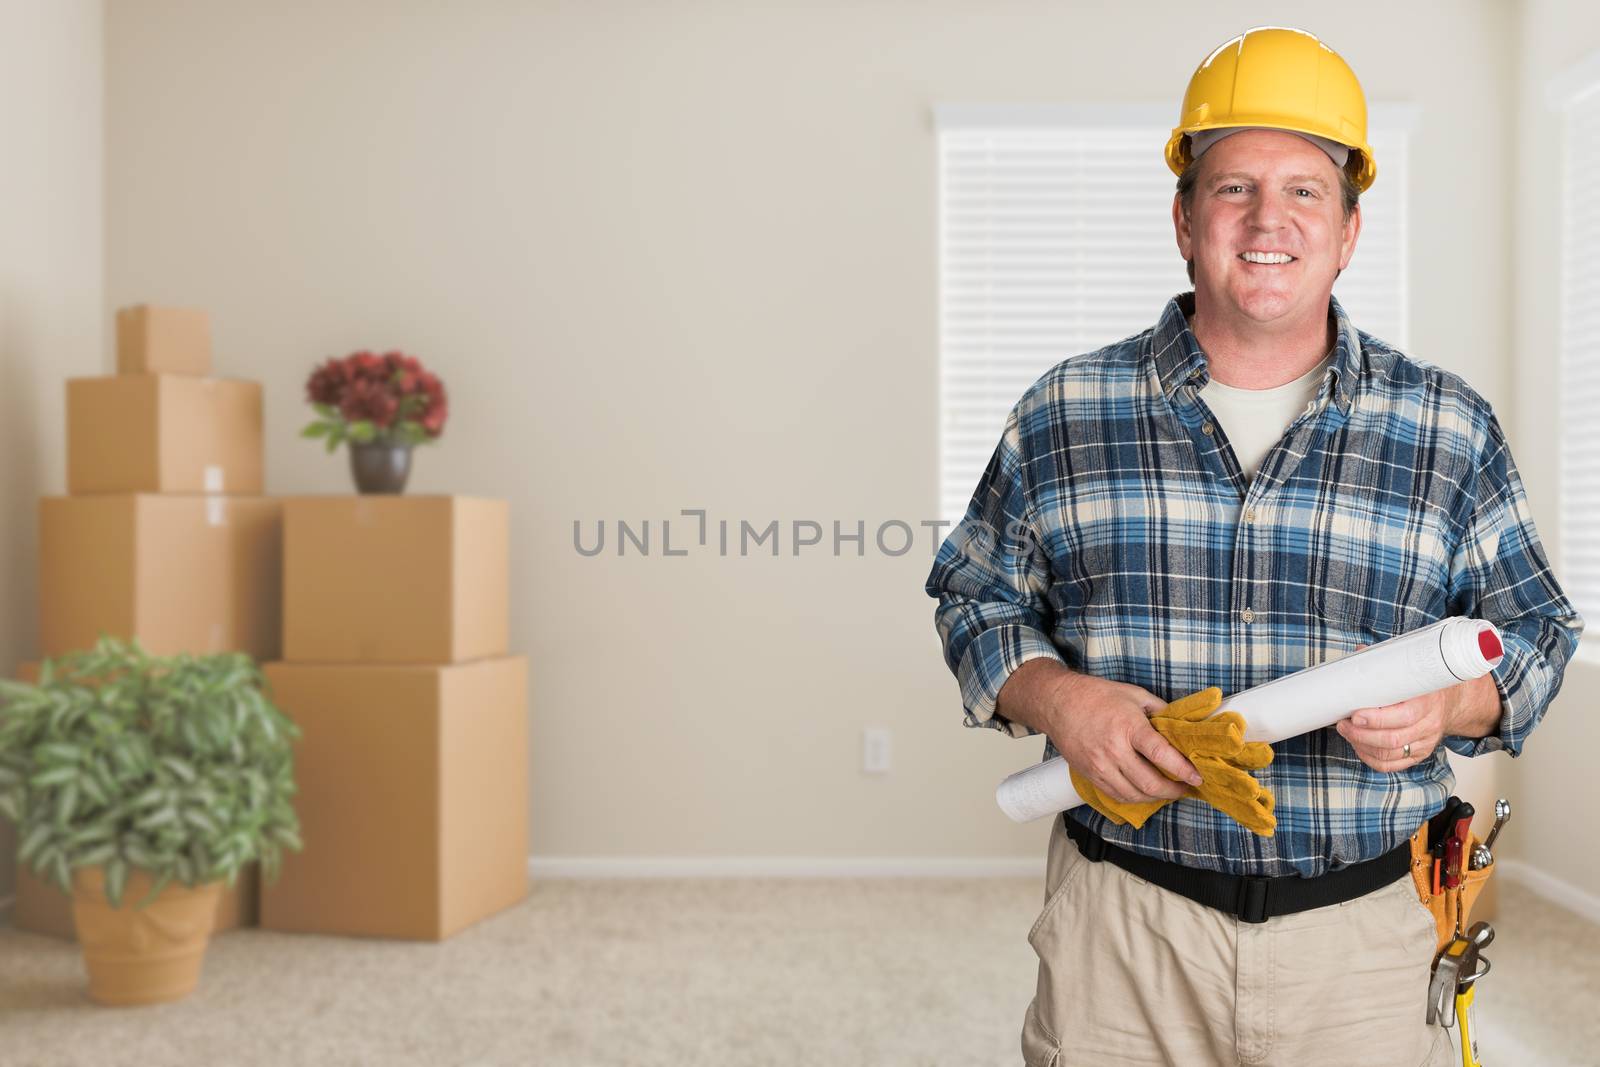 Contractor With Plans and Hard Hat Inside Empty Room with Moving Boxes. by Feverpitched